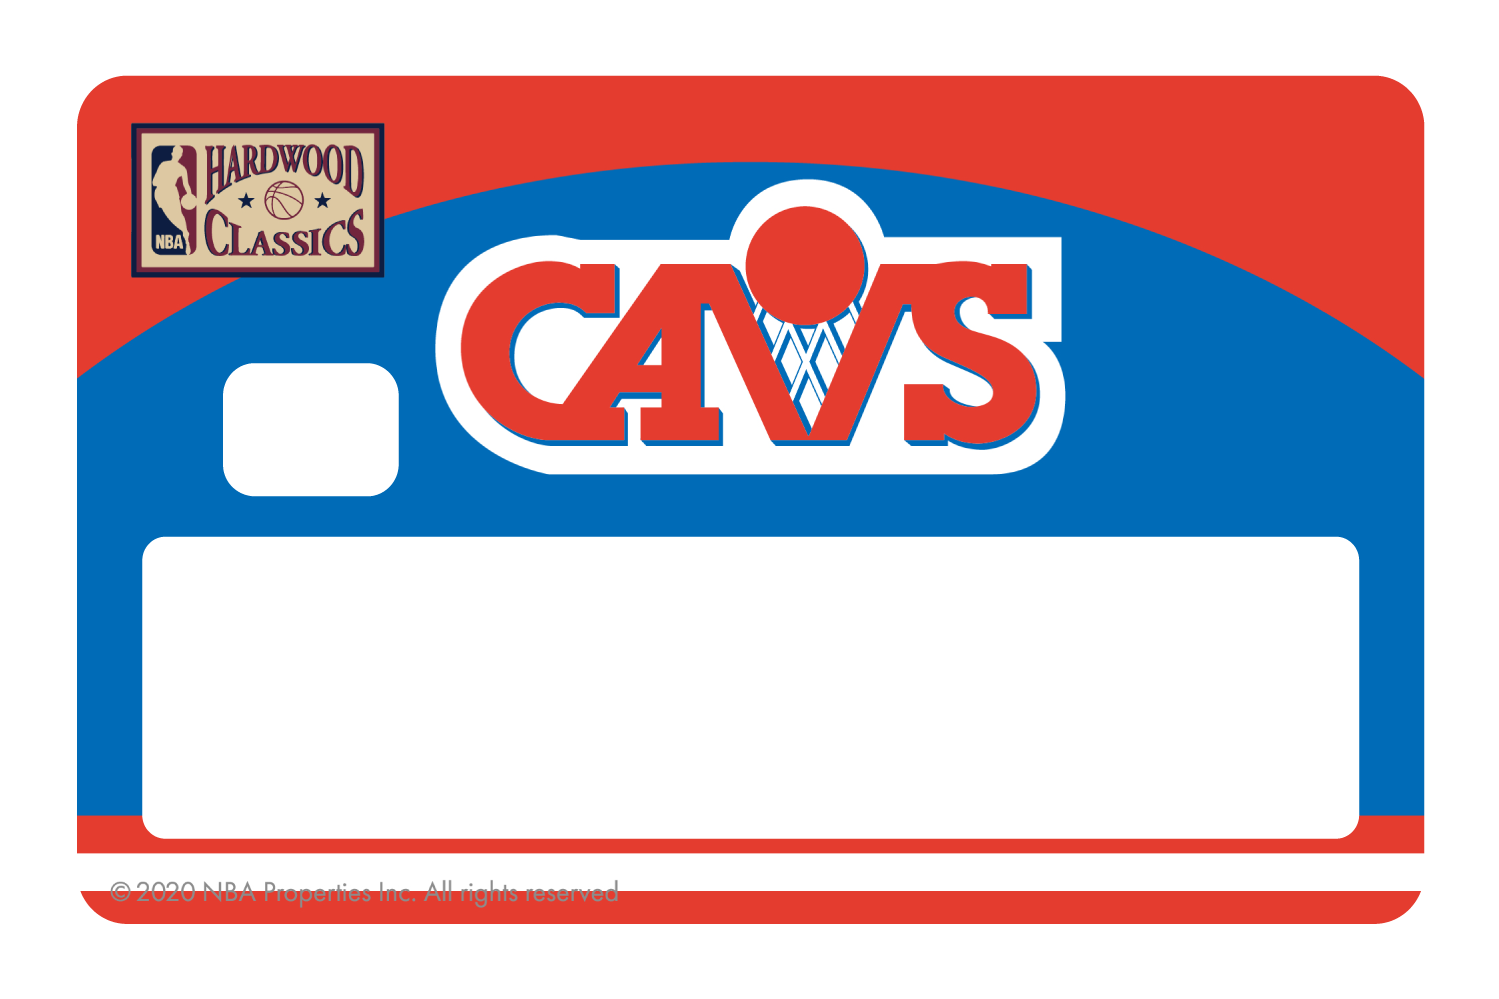 Credit Debit Card Skins | Cucu Covers - Customize Any Bank Card - Cleveland Cavaliers: Retro Courtside Hardwood Classics, Full Cover w/ Window / Large